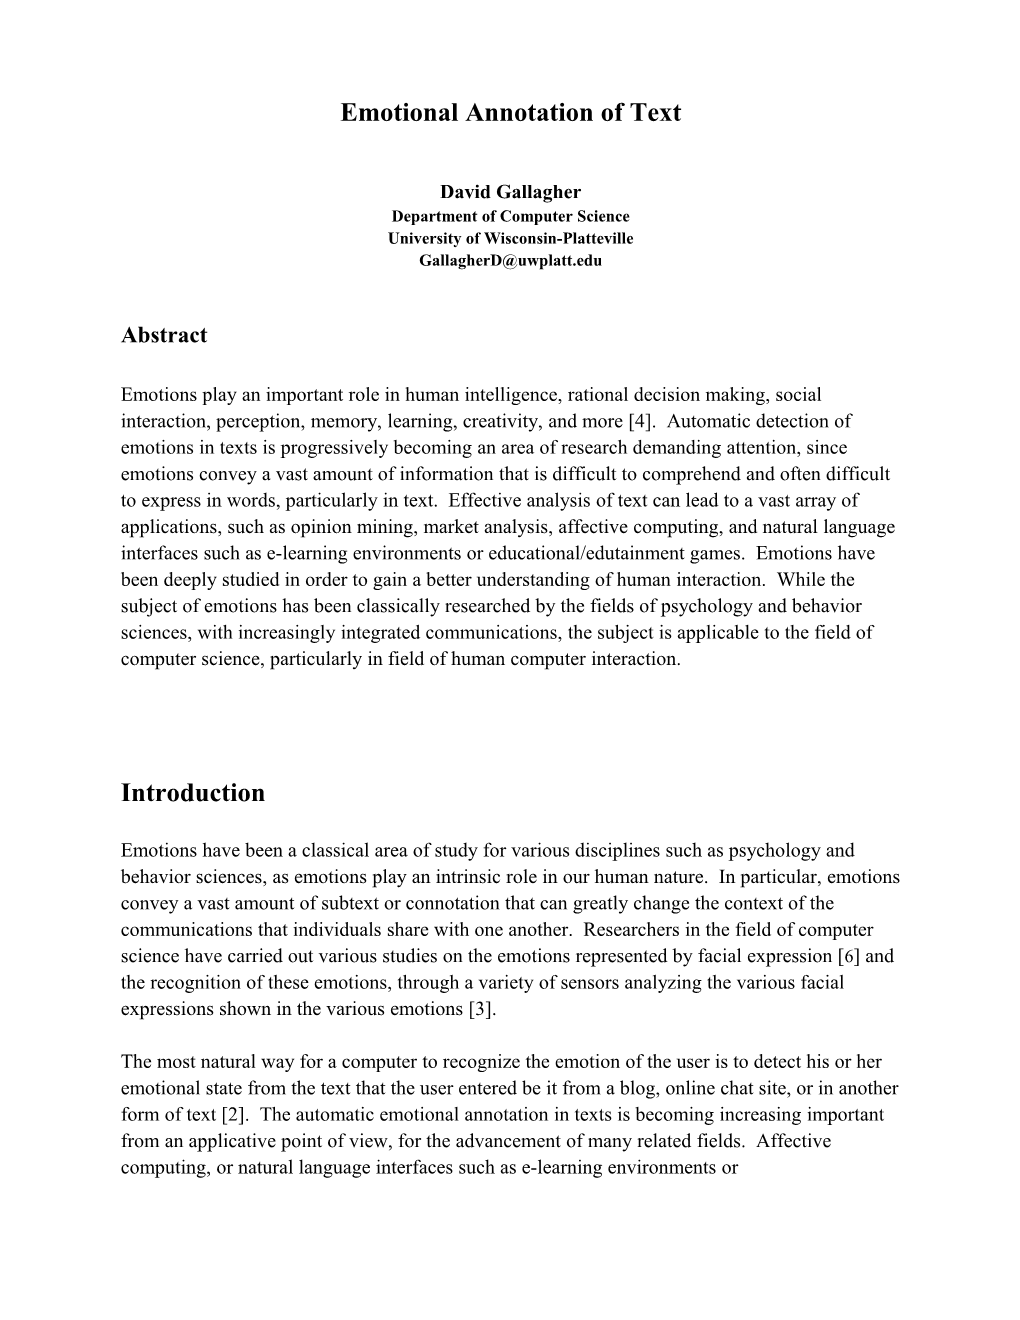 Gallagherd Emotional Annotation of Text Abstract